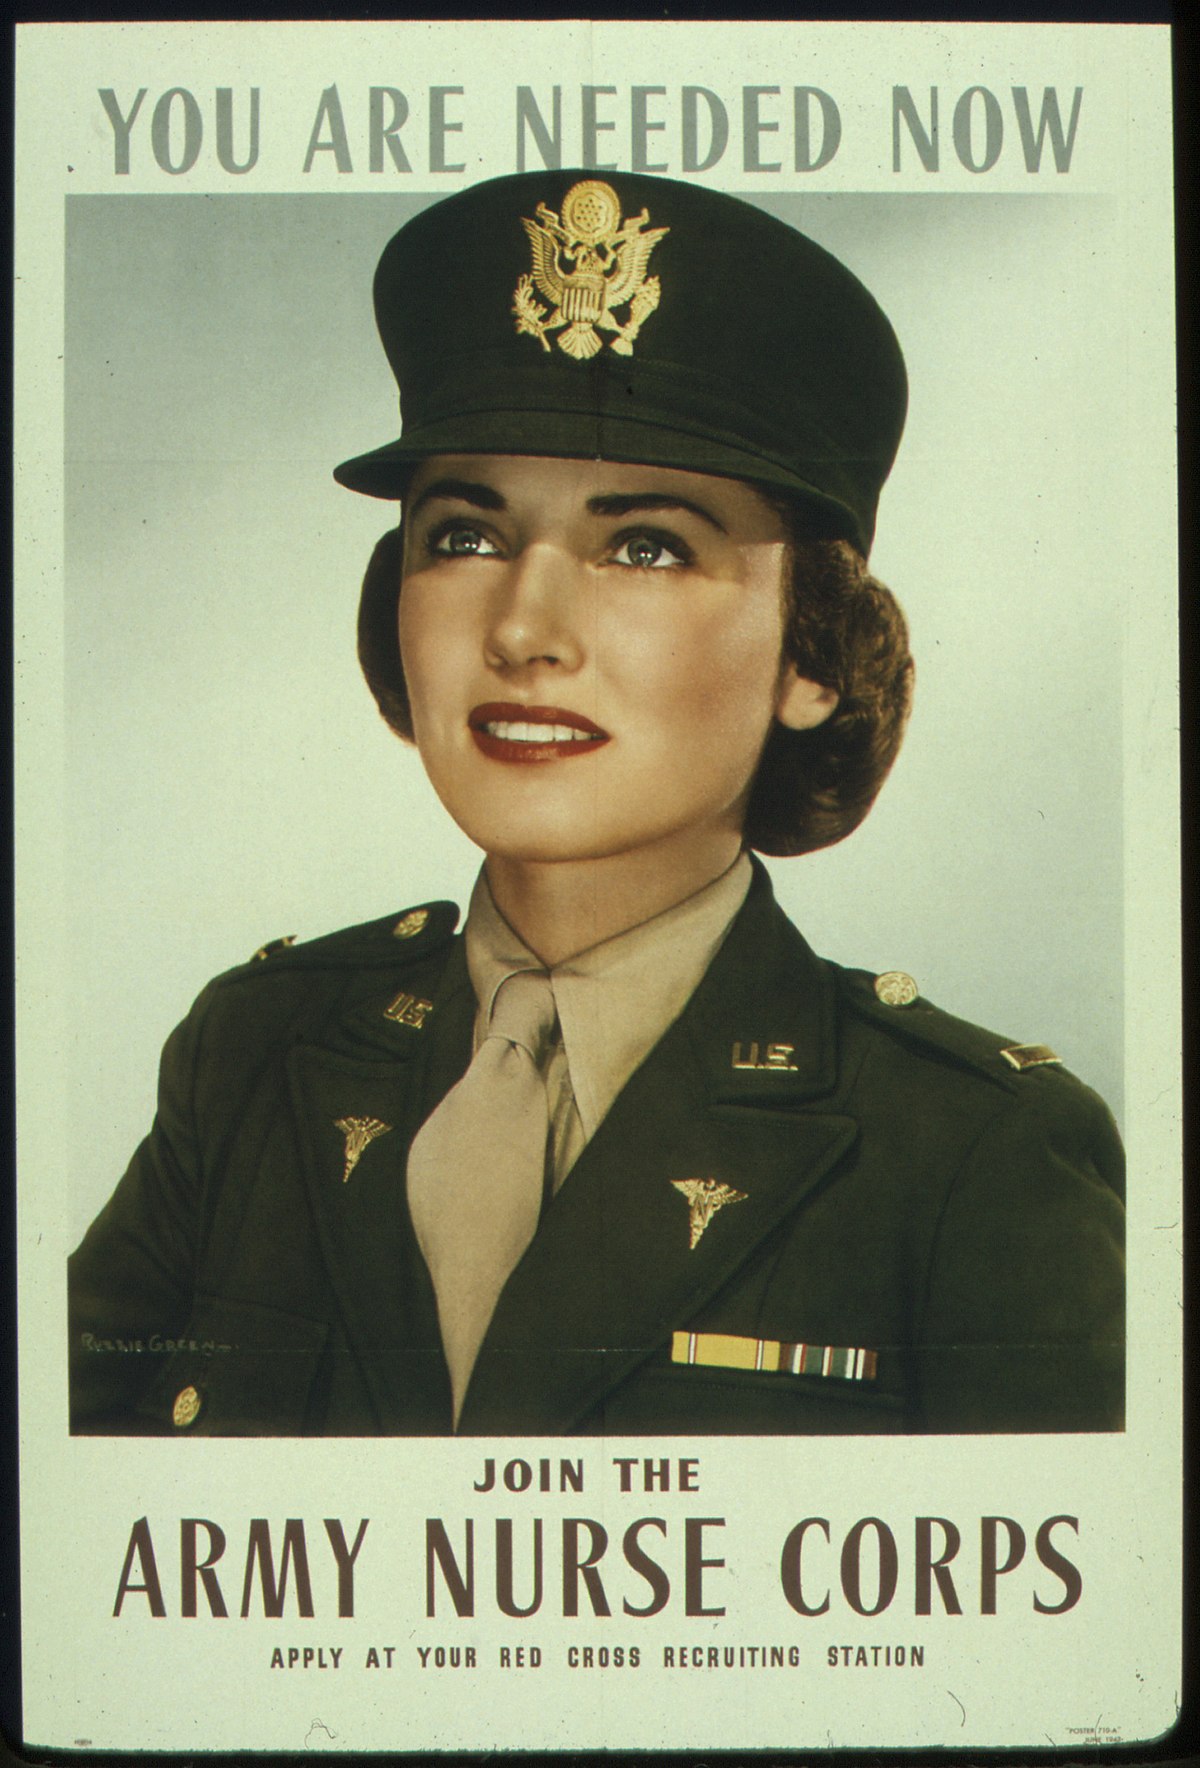 1200px-_you_are_needed_now._join_the_army_nurse_corps.__-_nara_-_516200